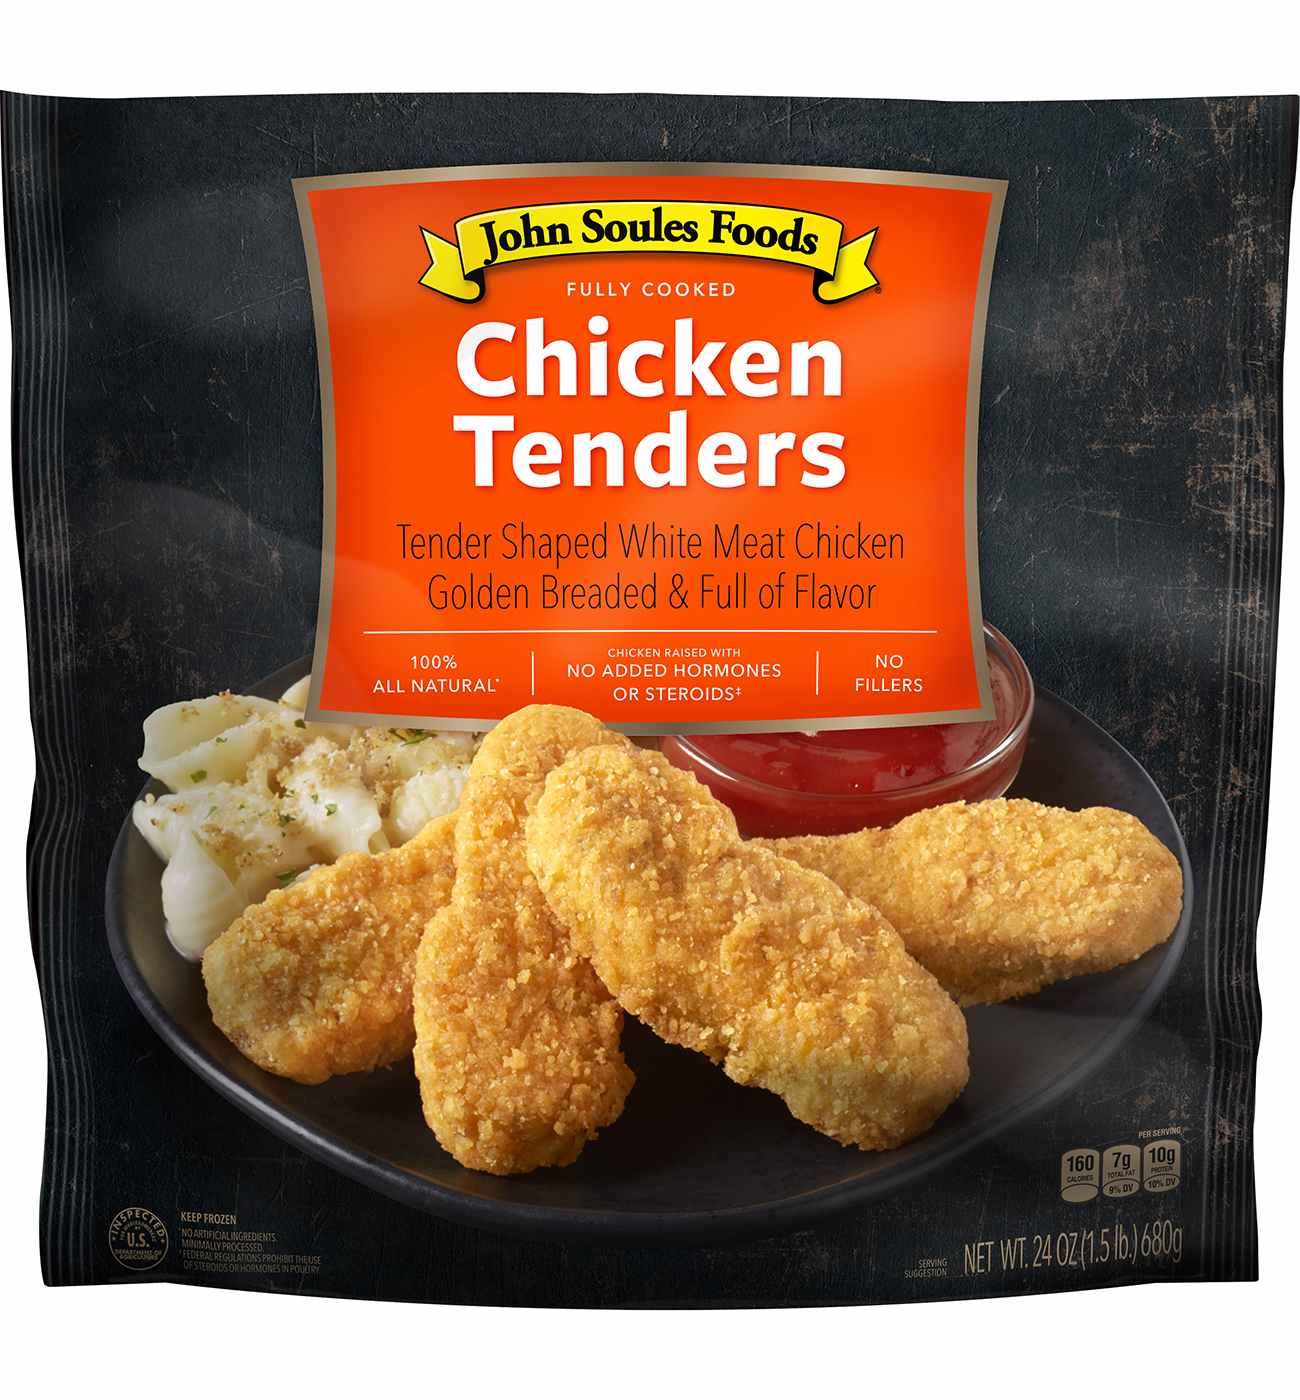 John Soules Foods Fully Cooked Frozen Chicken Tenders; image 1 of 4